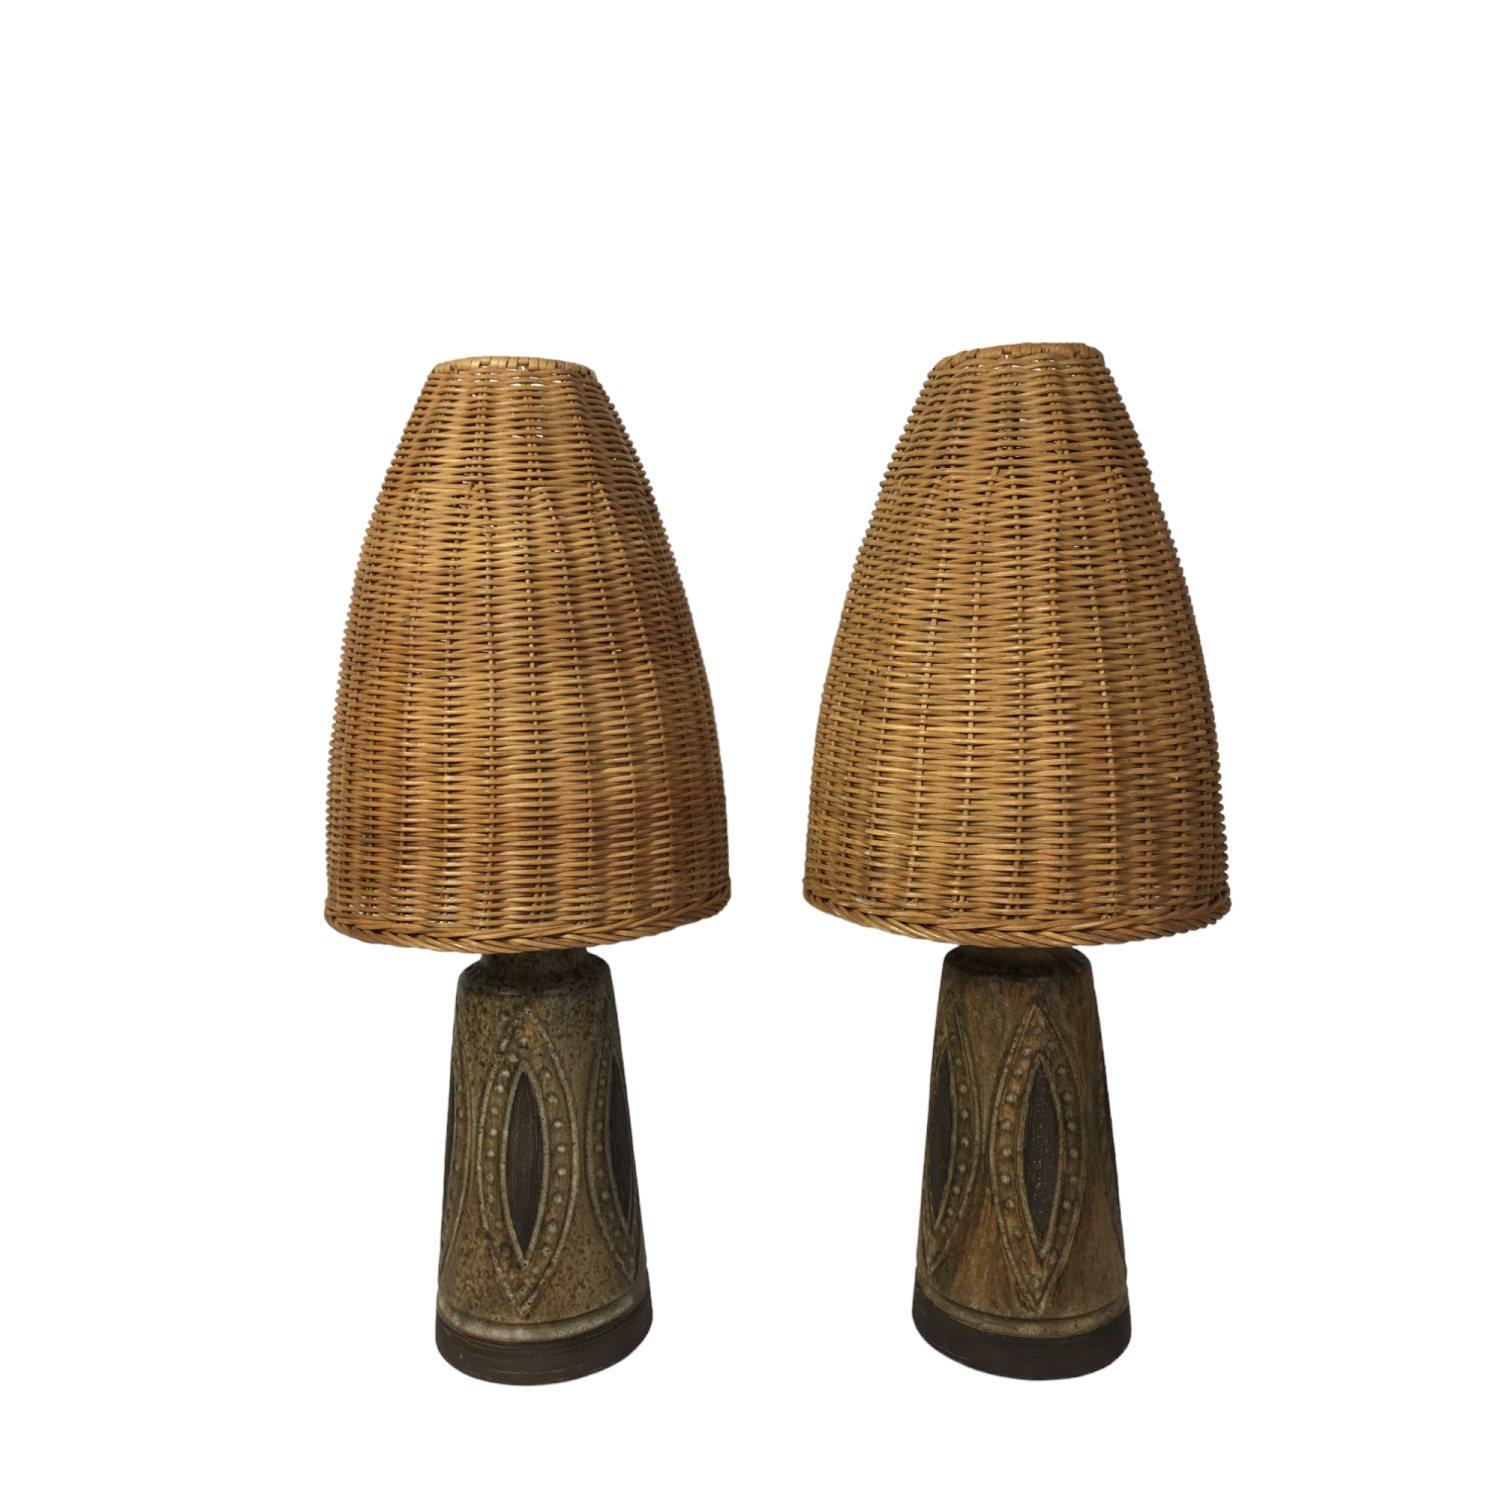 Pair of Mid-century Ceramic table lamp with wicker lamp shade from Denmark 1970s For Sale